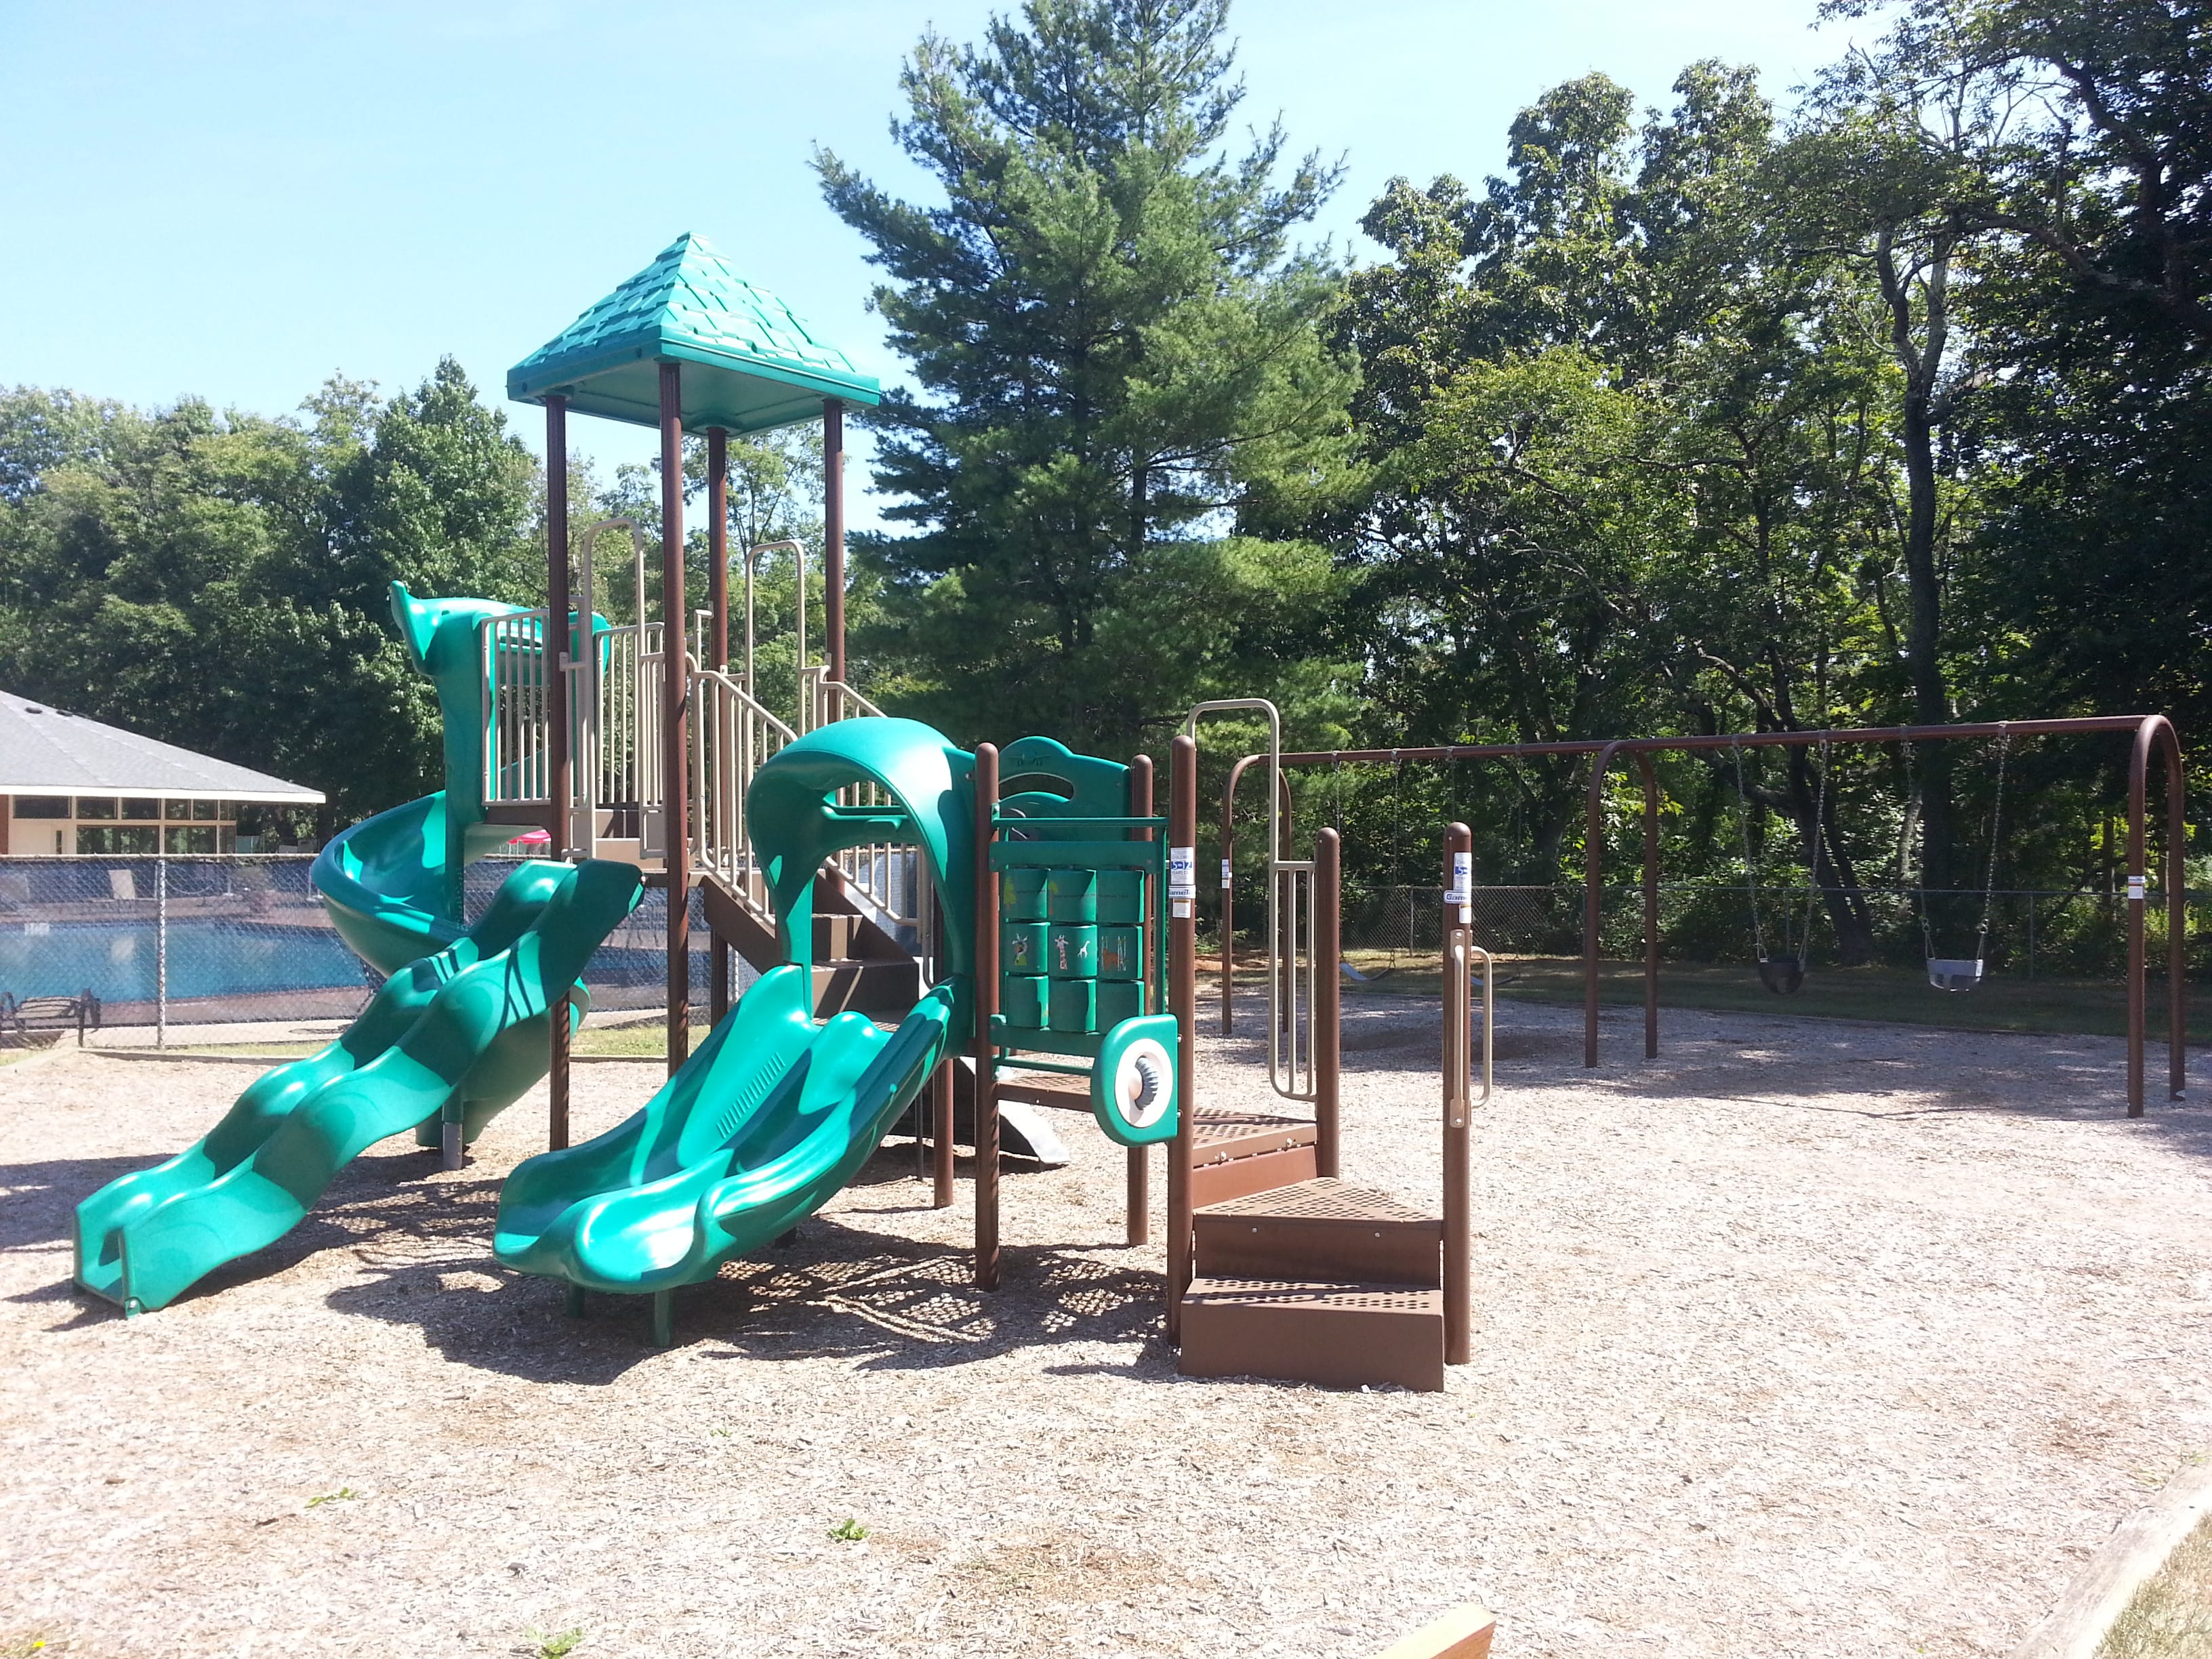 Located next to the Winding Brook pool is this tot lot for children.